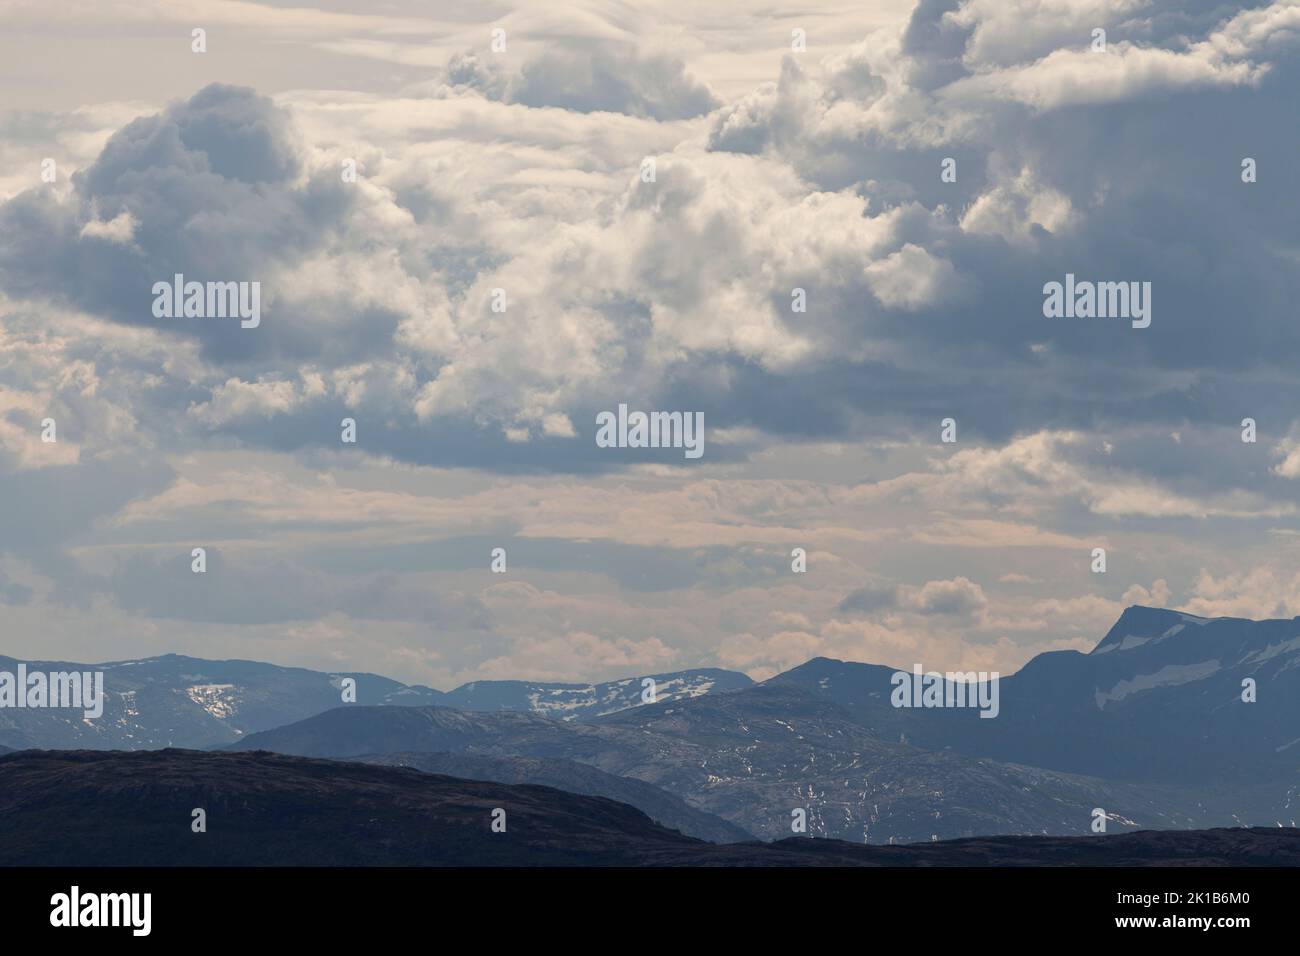 Nordic landscape, mountains and valleys with a cloudy sky above. Stock Photo